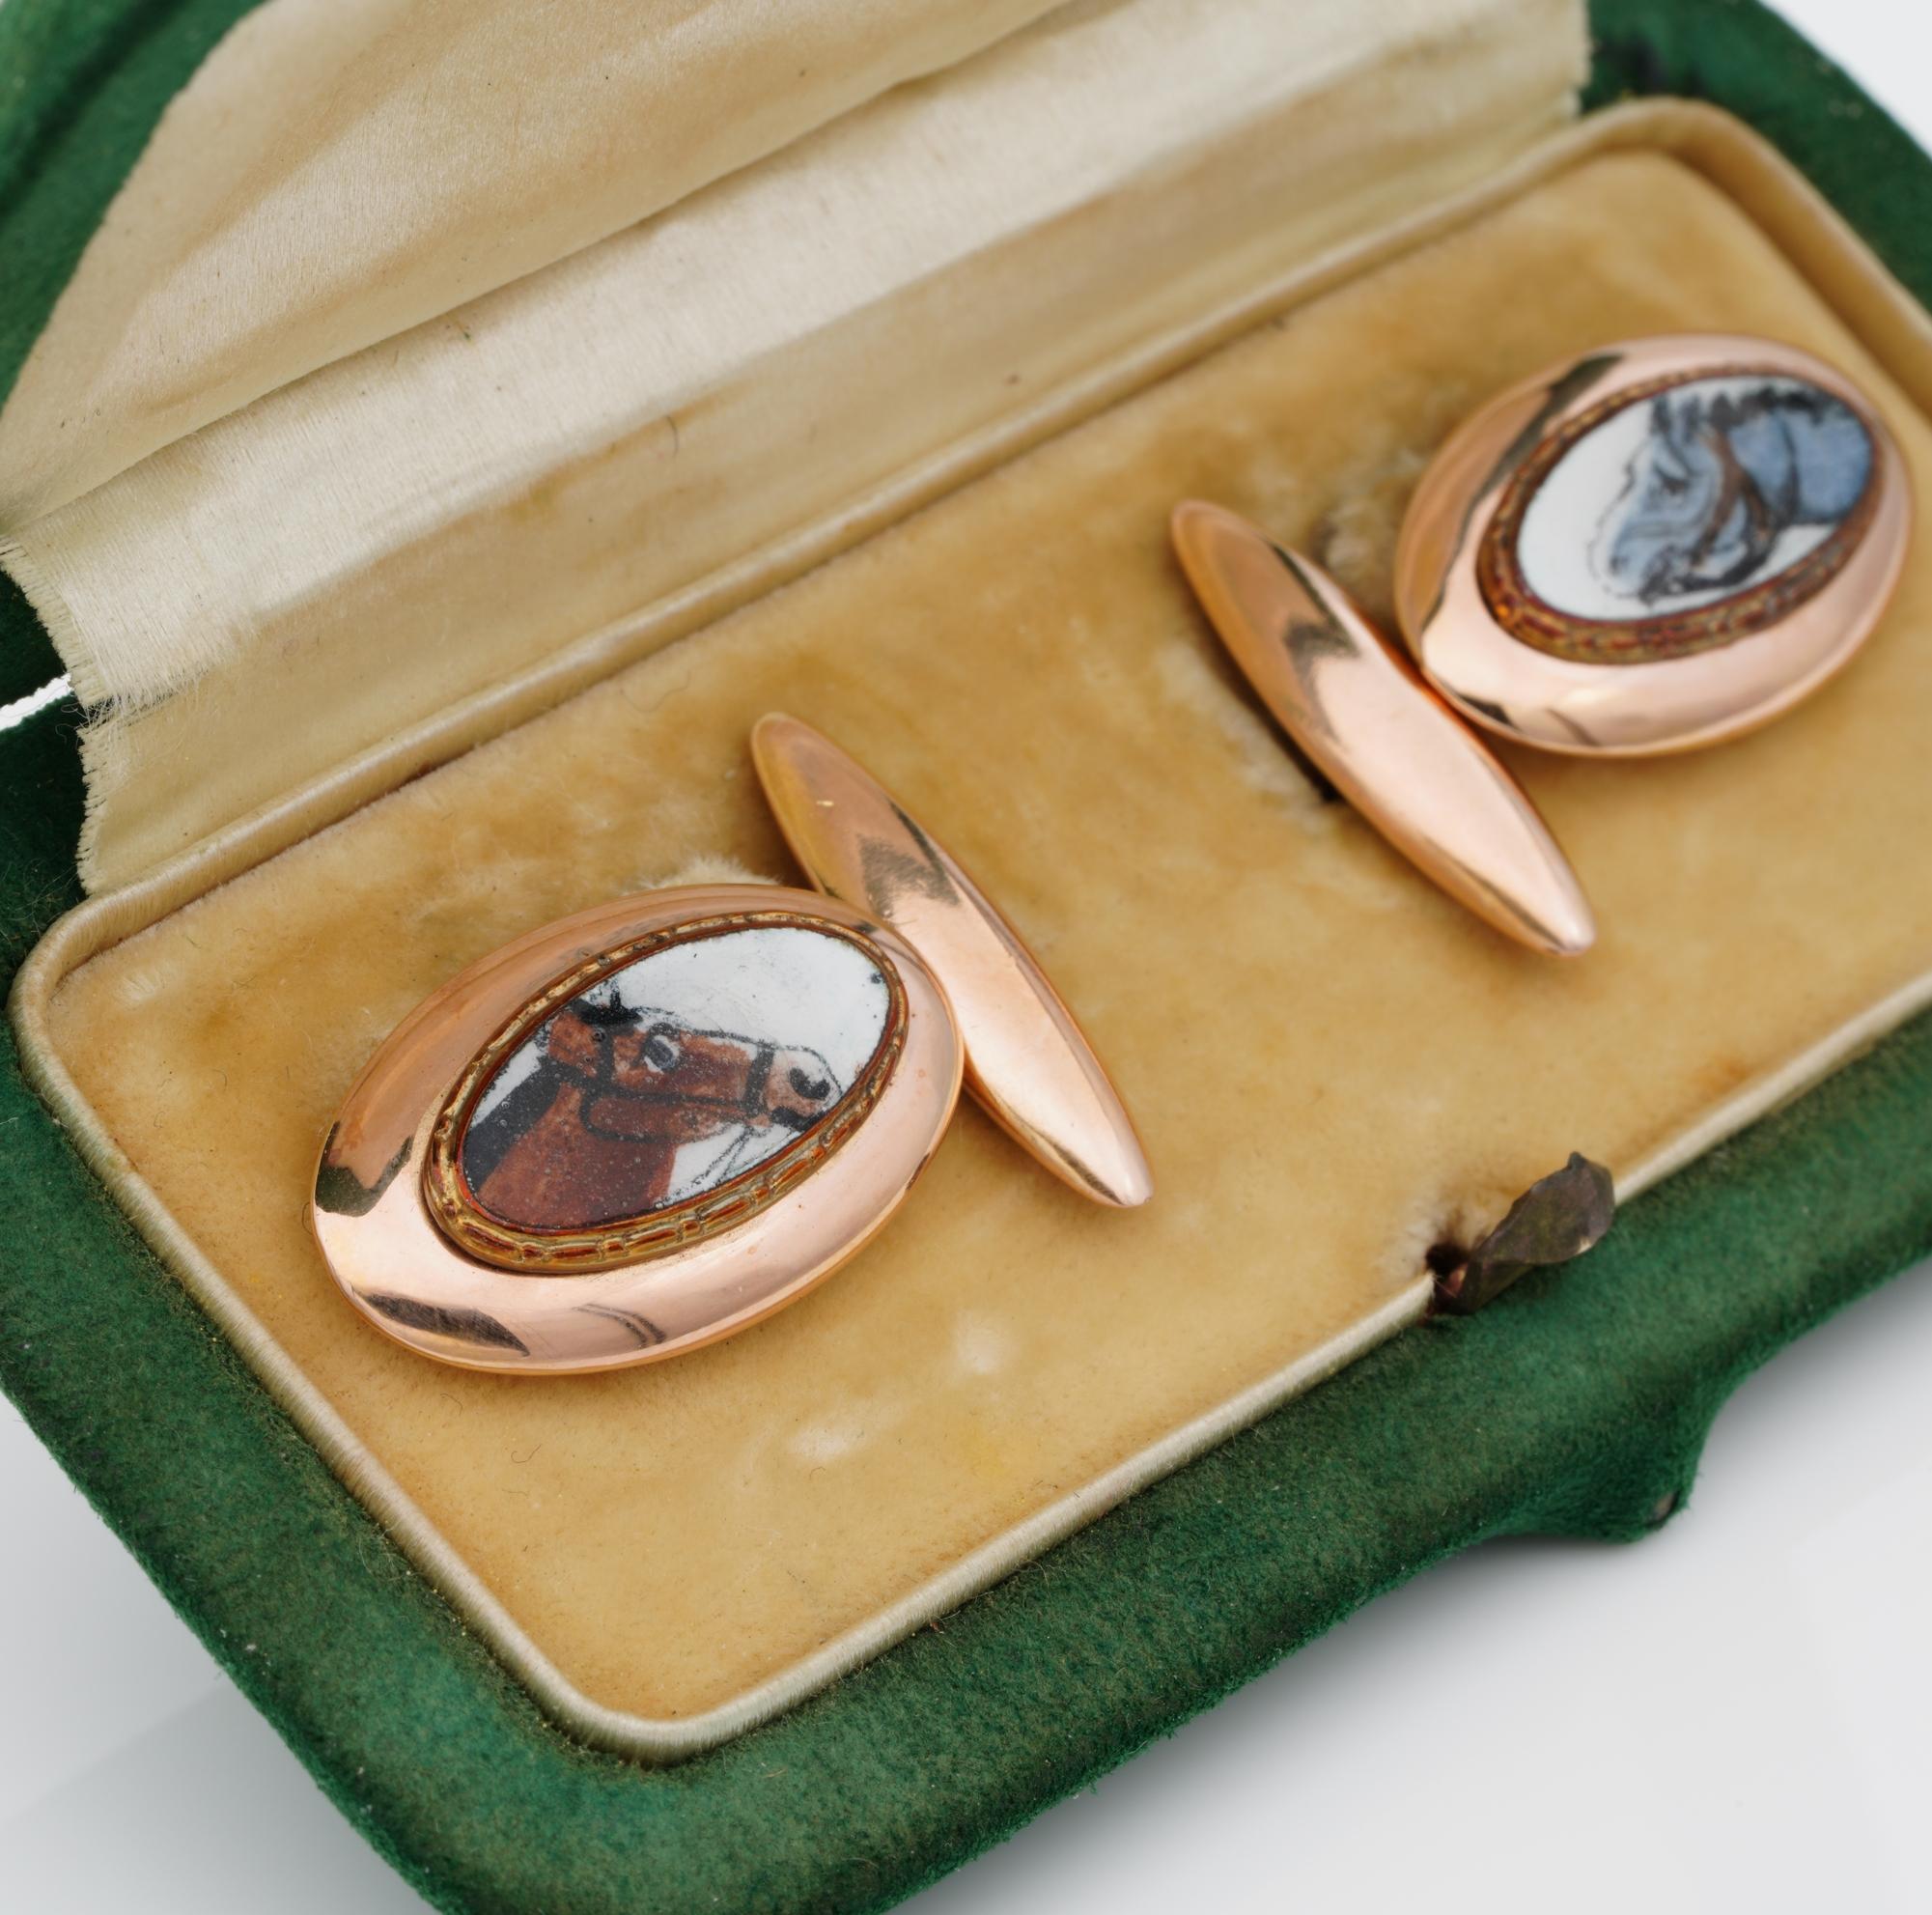 Antique Art deco period unique Italian cufflinks individually hand fabricated of solid 18 KT gold rose gold
1925 ca
They are 14 mm. x 24 mm. (h. x w.)
Artistry made in painted miniatures on gold depicting beautiful horses set in gold frame
They